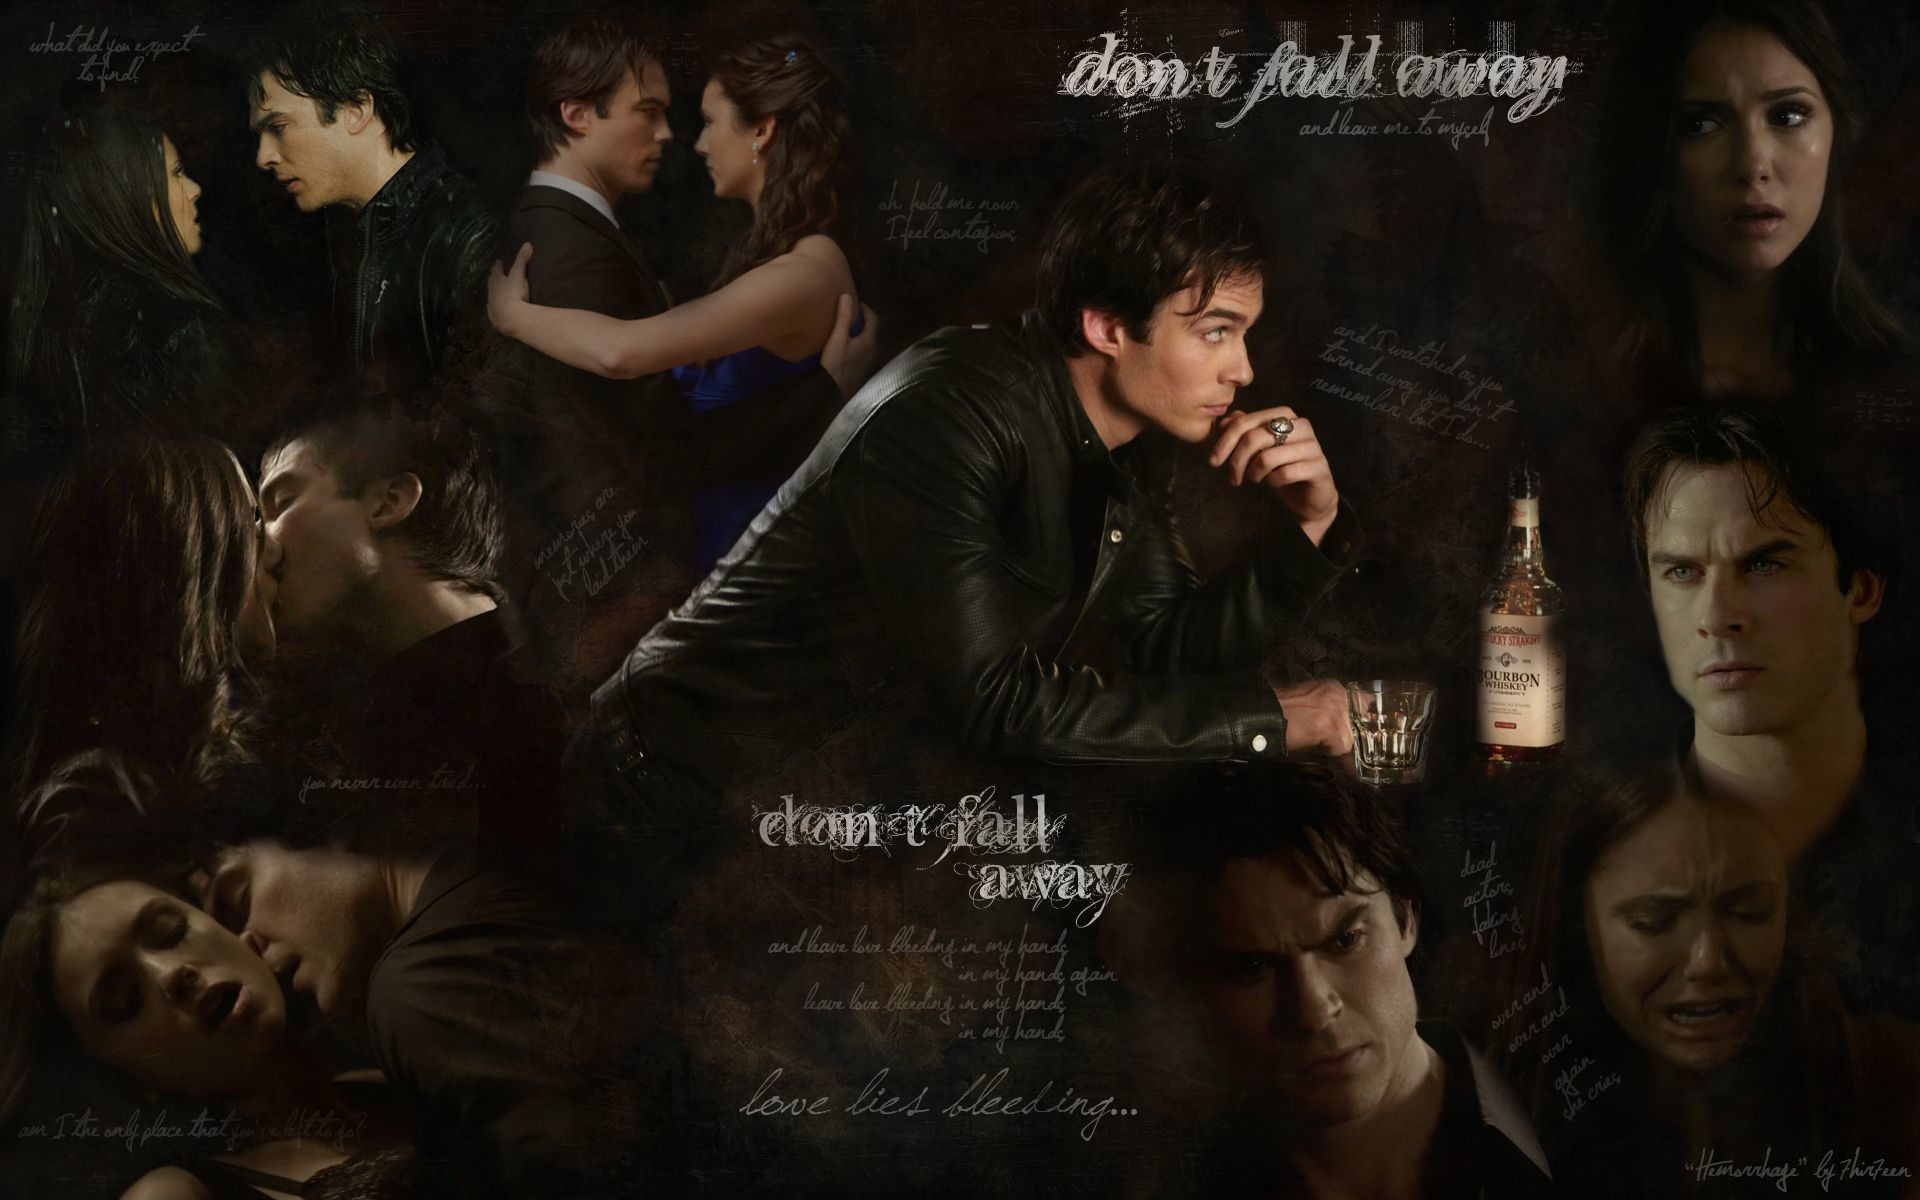 Aesthetic Collage Vampire Diaries Wallpapers